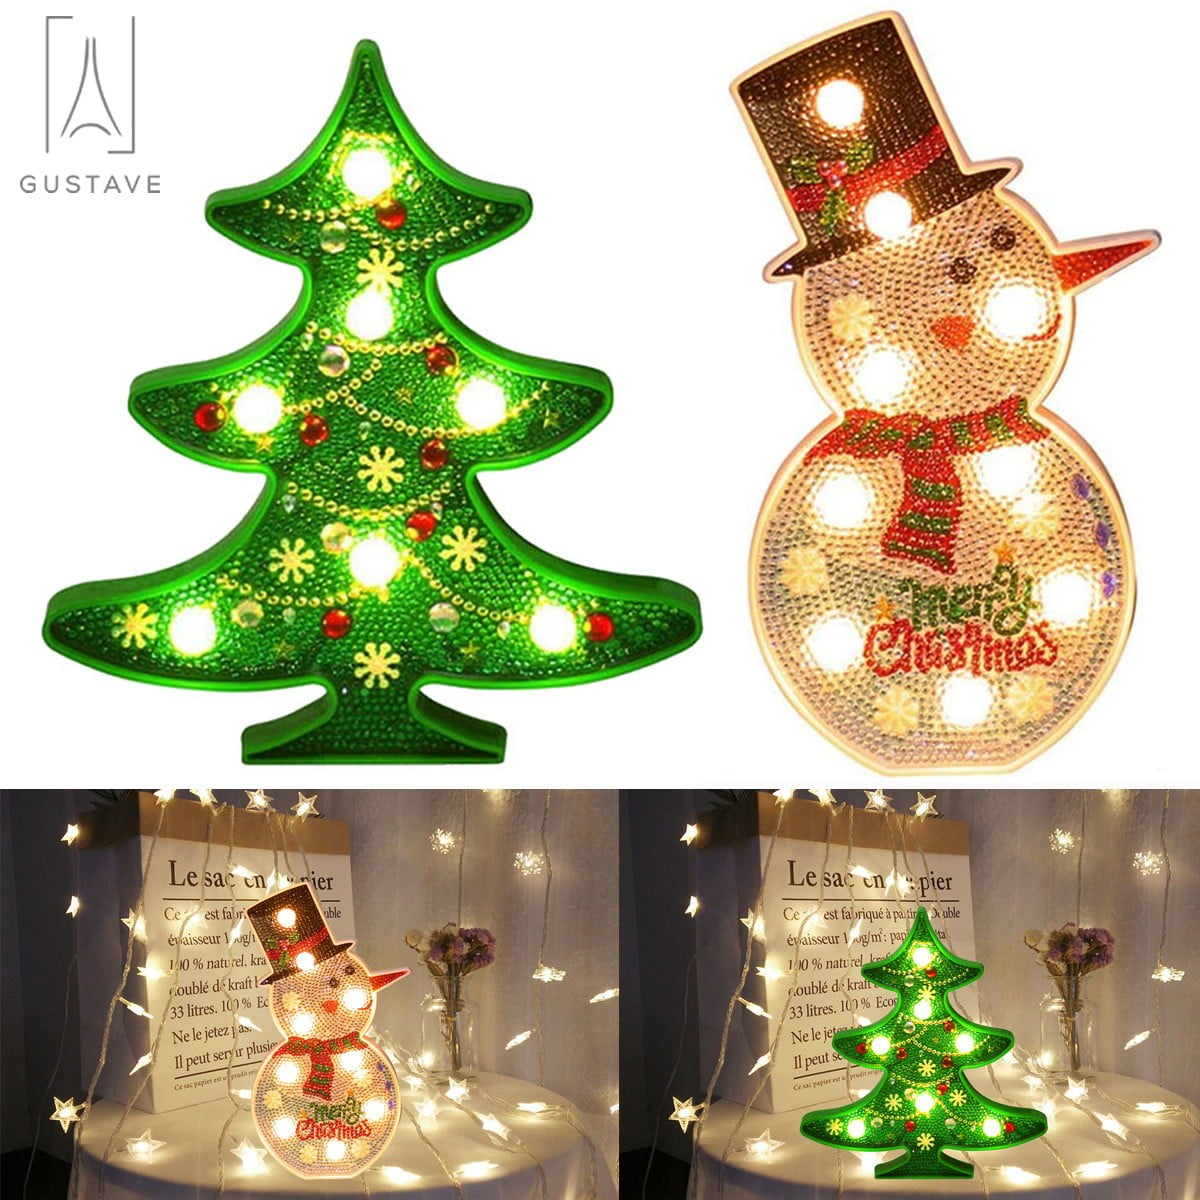 Christmas Snowman DIY Diamond Painting Kit Decorative Table Lamp With  Crystal Painting Christmas Night Lights From Sunway168, $10.67